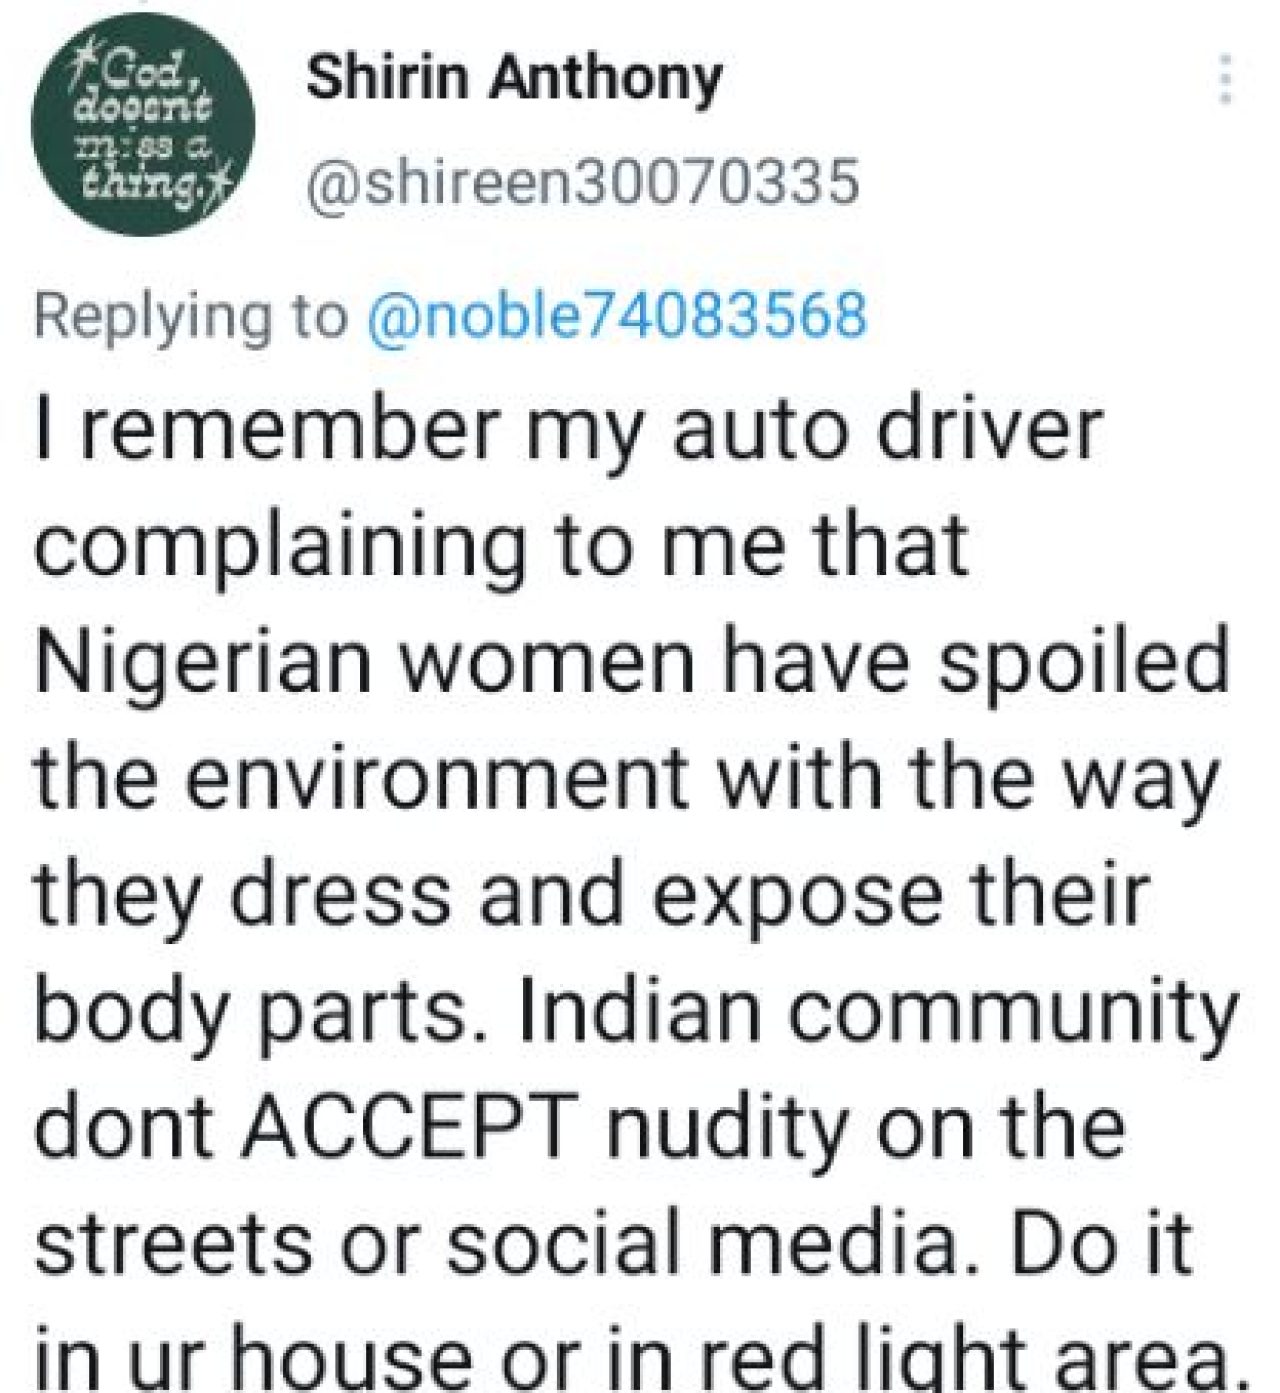 Talk to them and they will carry their ancestors debts on your head - Indian widow of Nigerian man drags Naija women on SM. Afro News Wire